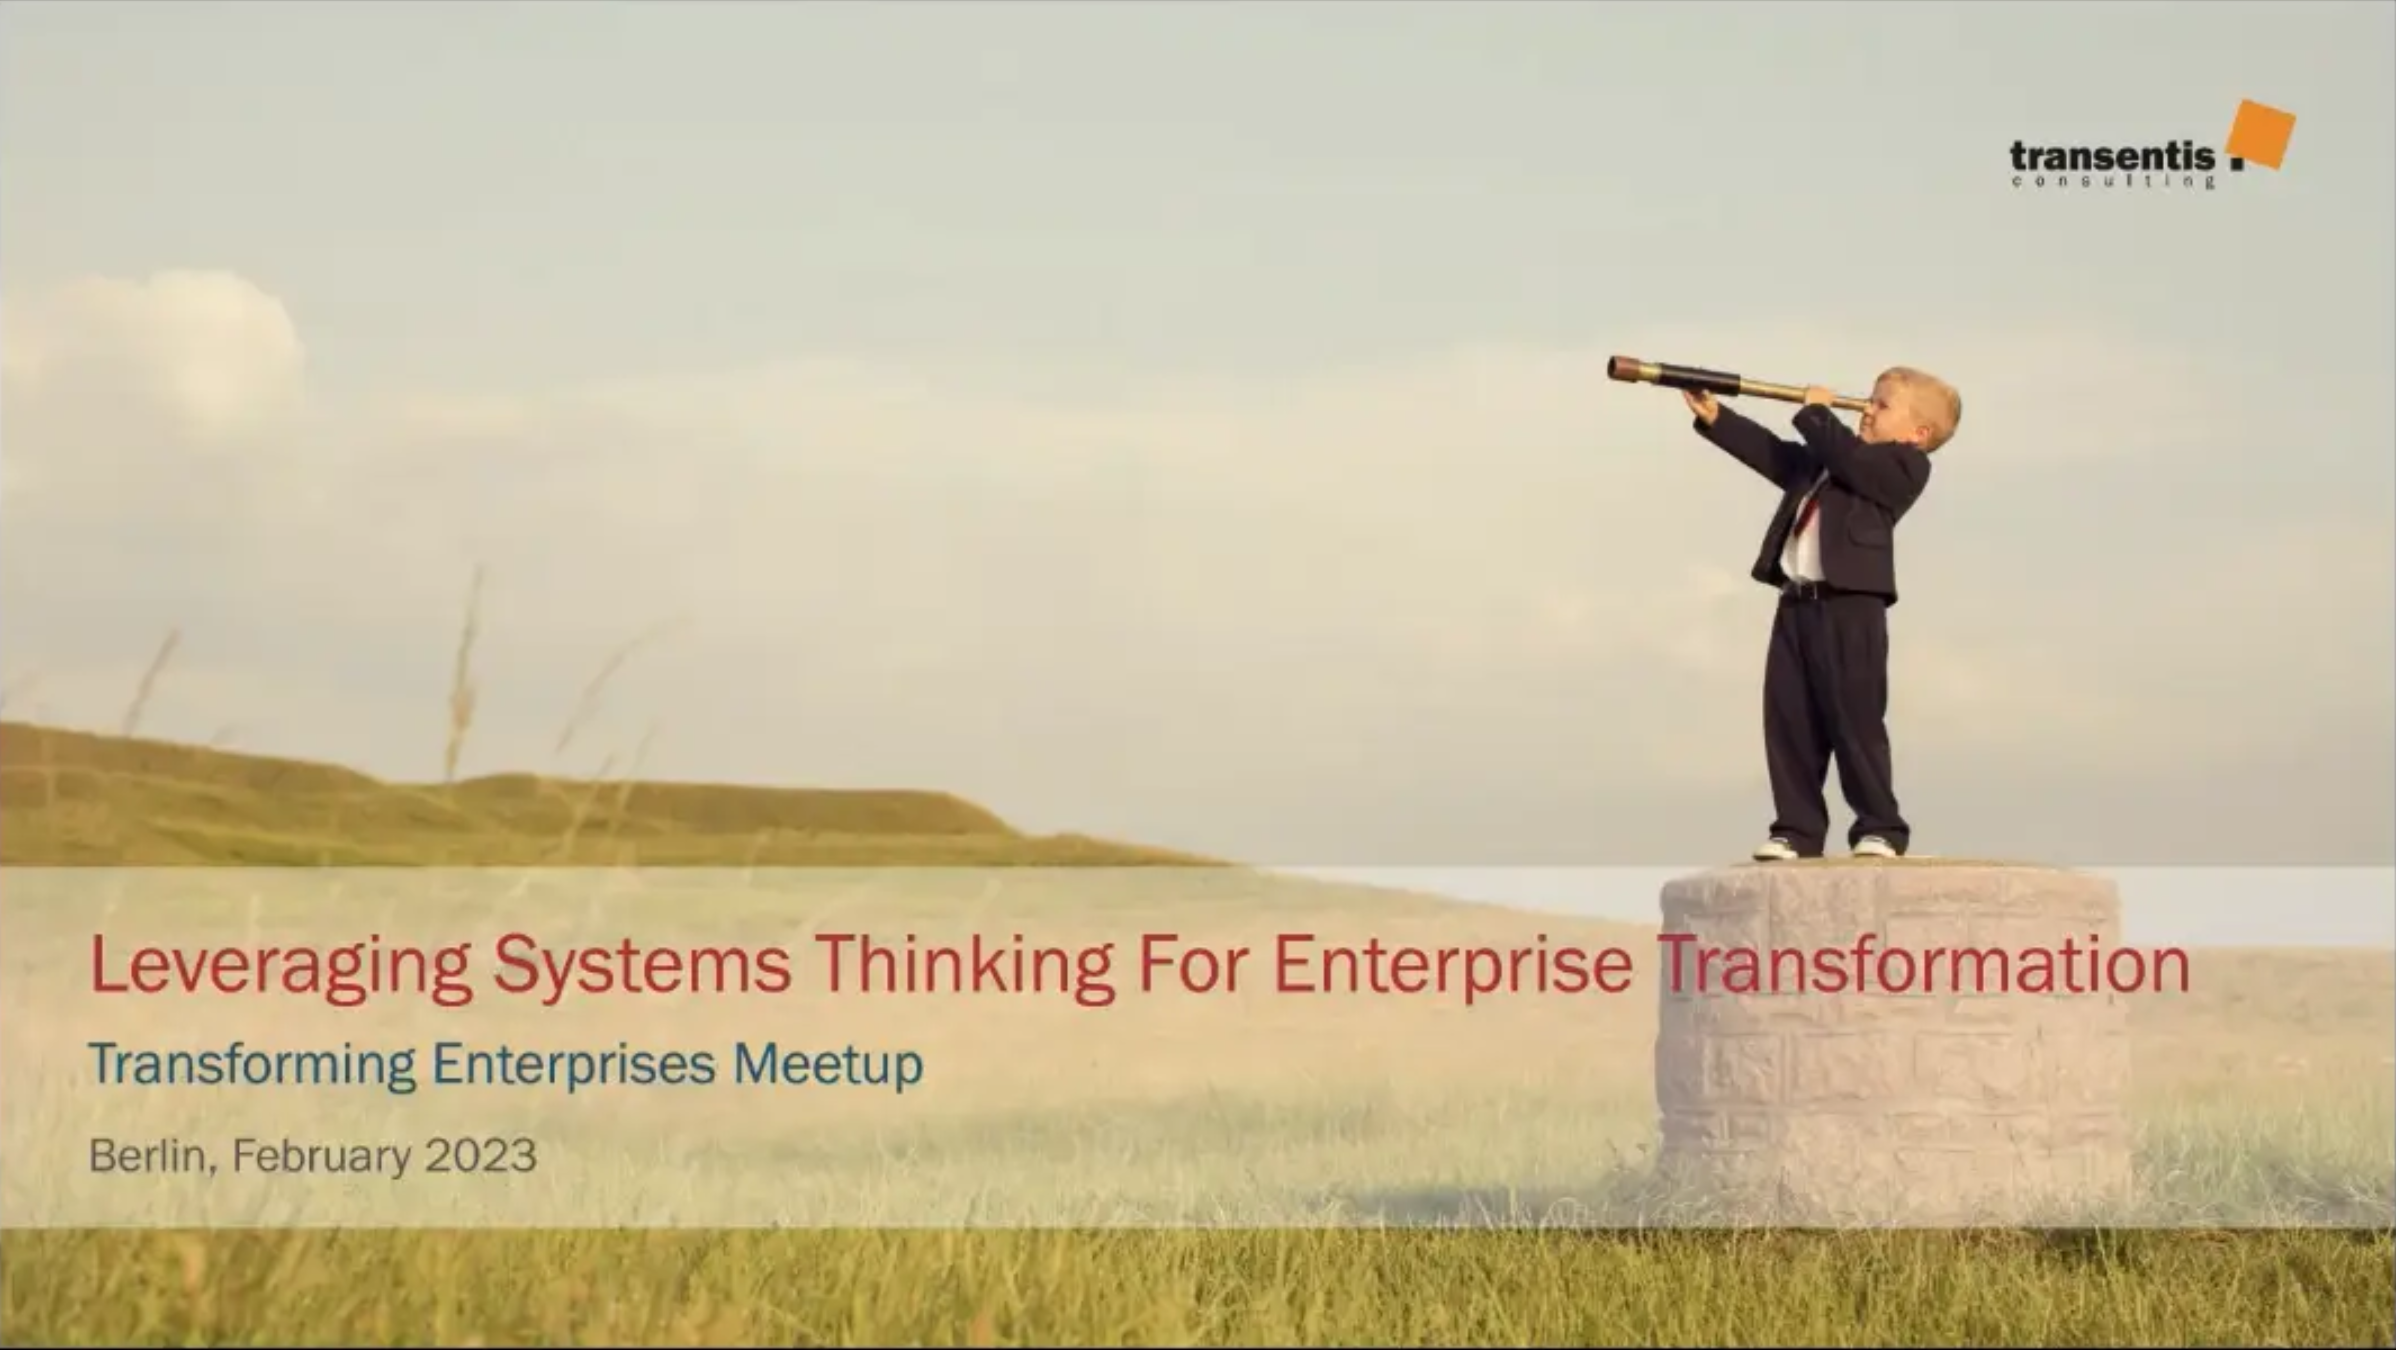 Leveraging Systems Thinking For Enterprise Transformation (PDF)